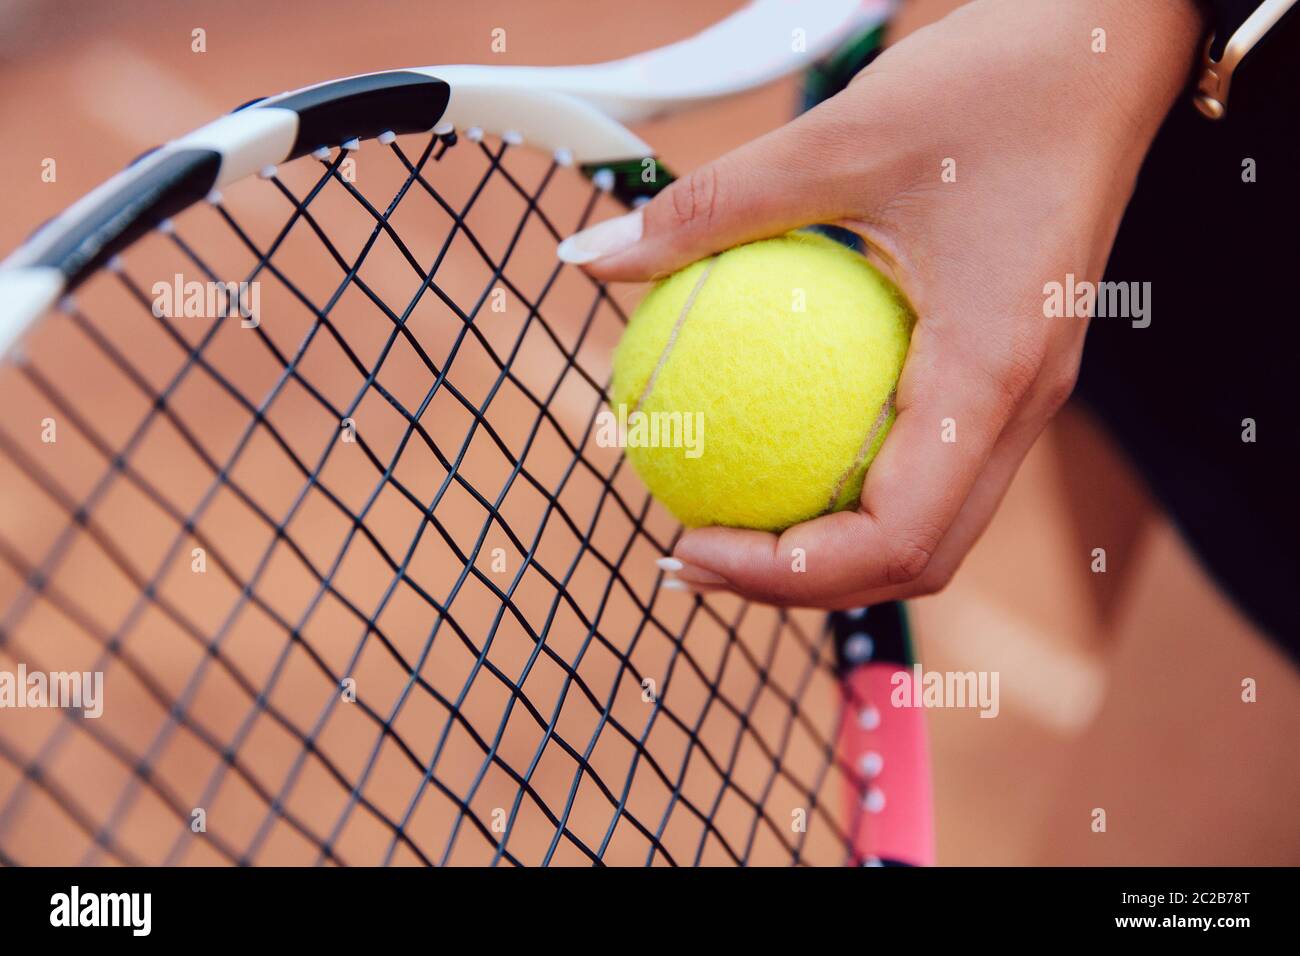 Female Player S Hand With Tennis Ball Preparing To Serve During A Match Close Up View Stock Photo Alamy